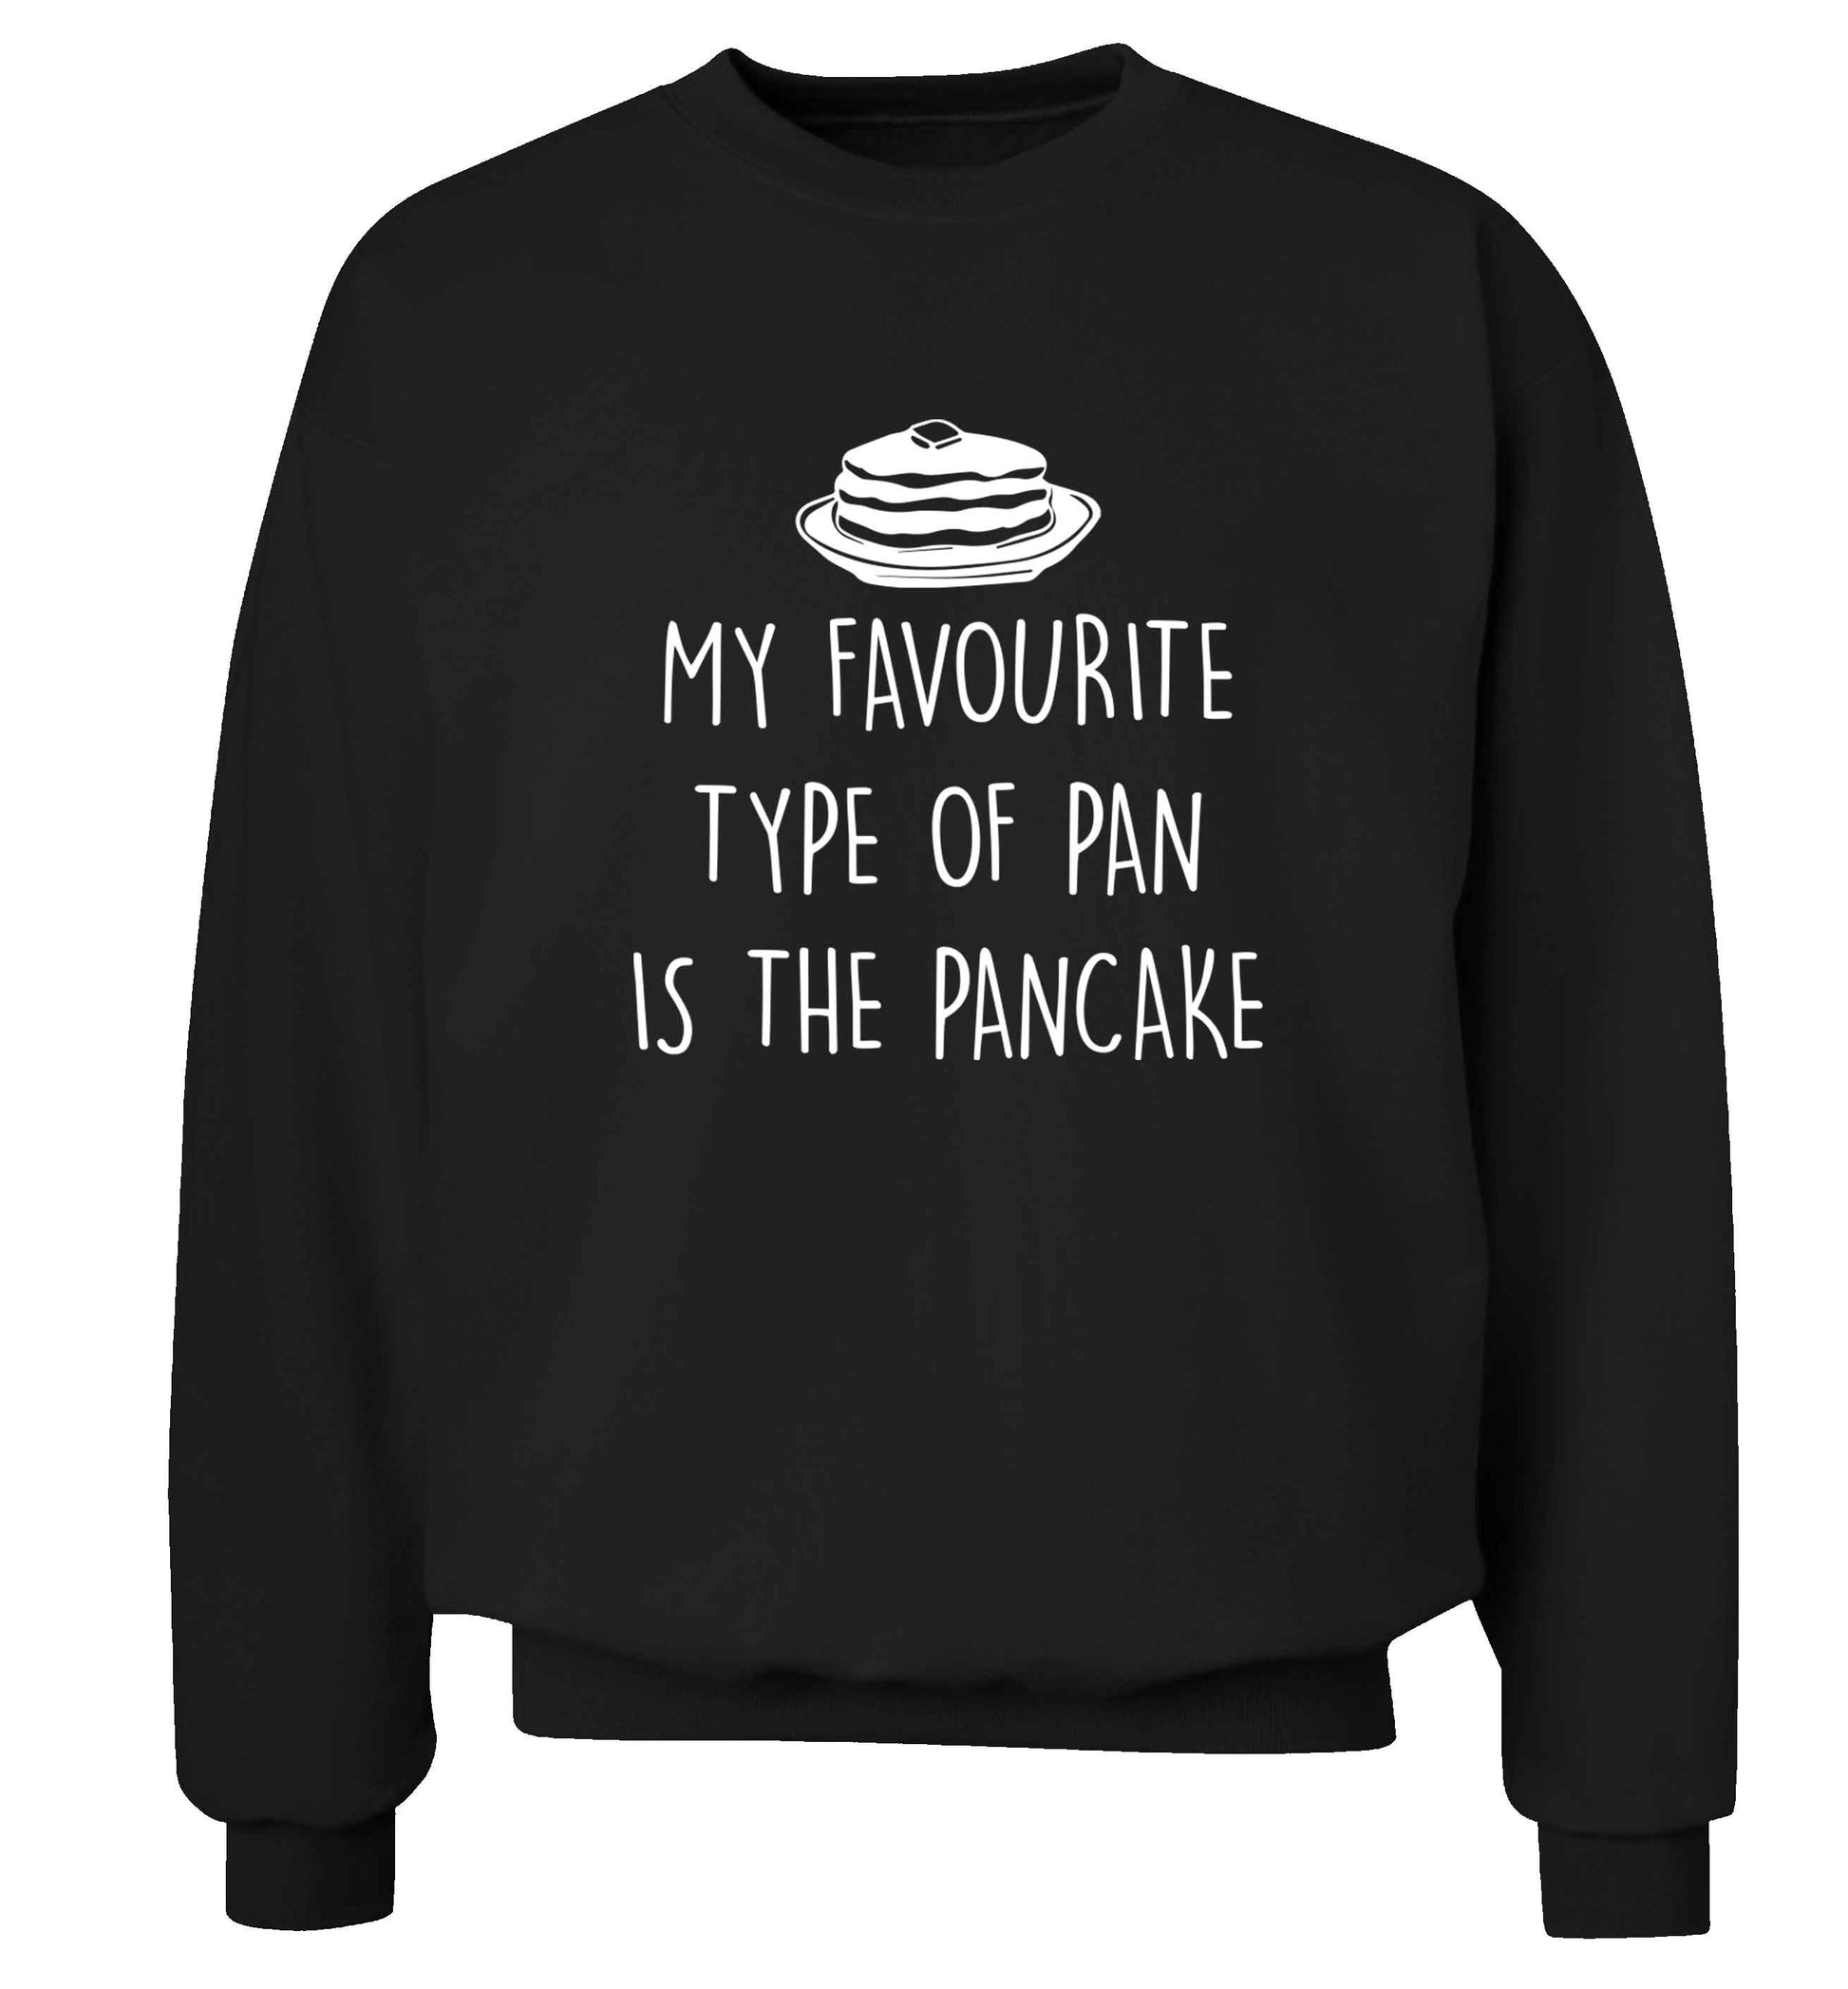 My favourite type of pan is the pancake adult's unisex black sweater 2XL